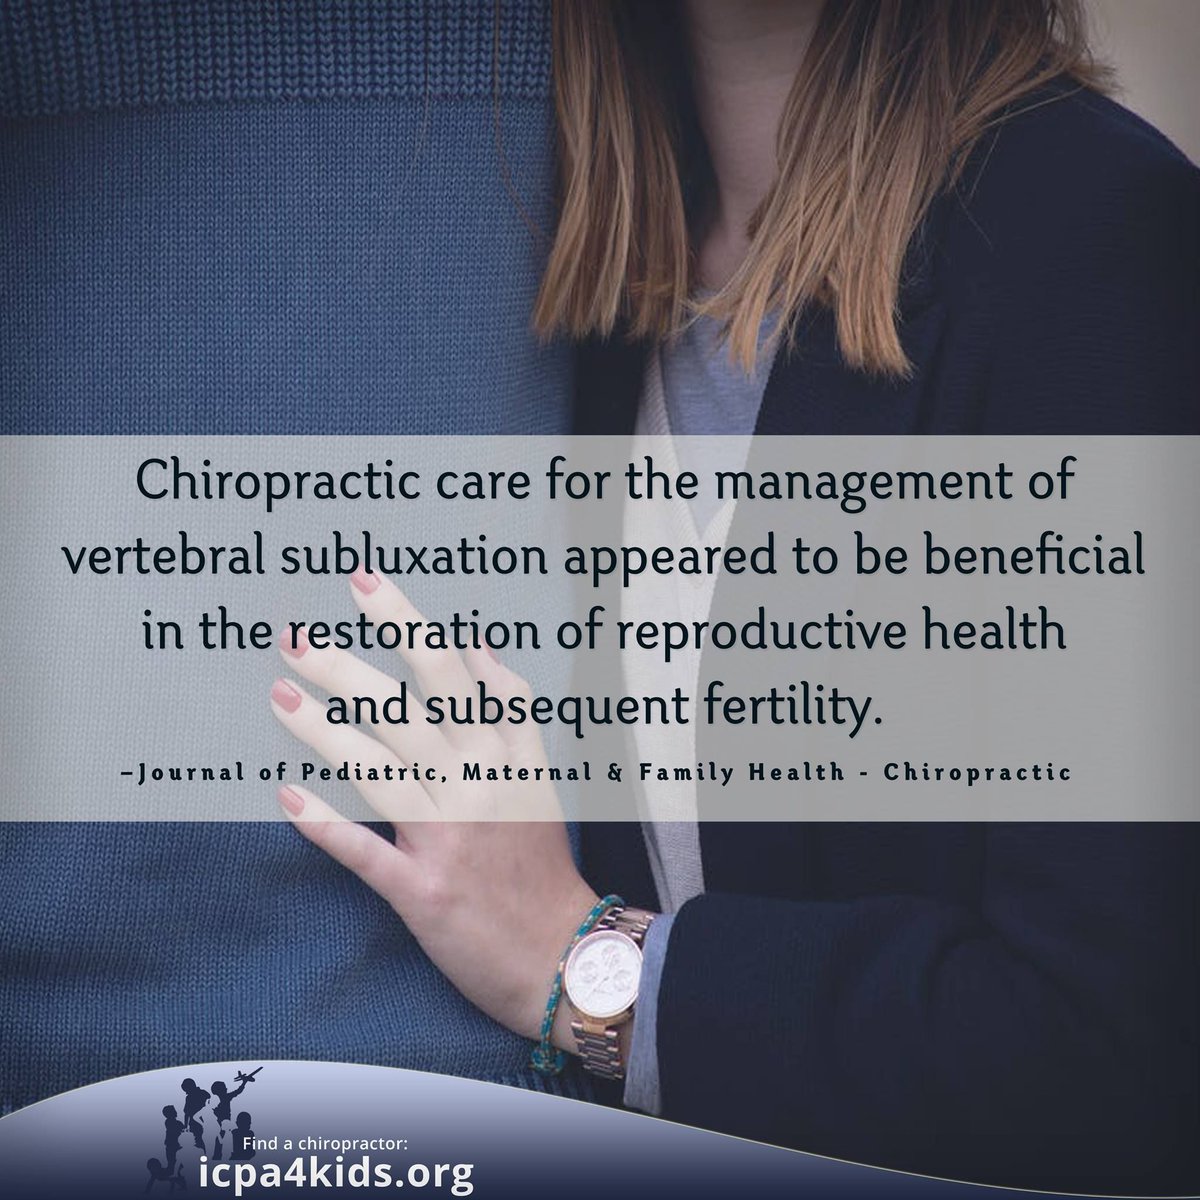 Conceiving can be challenging for many, but neurologically based chiropractic care might be your answer. #gonatural #thisisourcredence #conceivenaturally